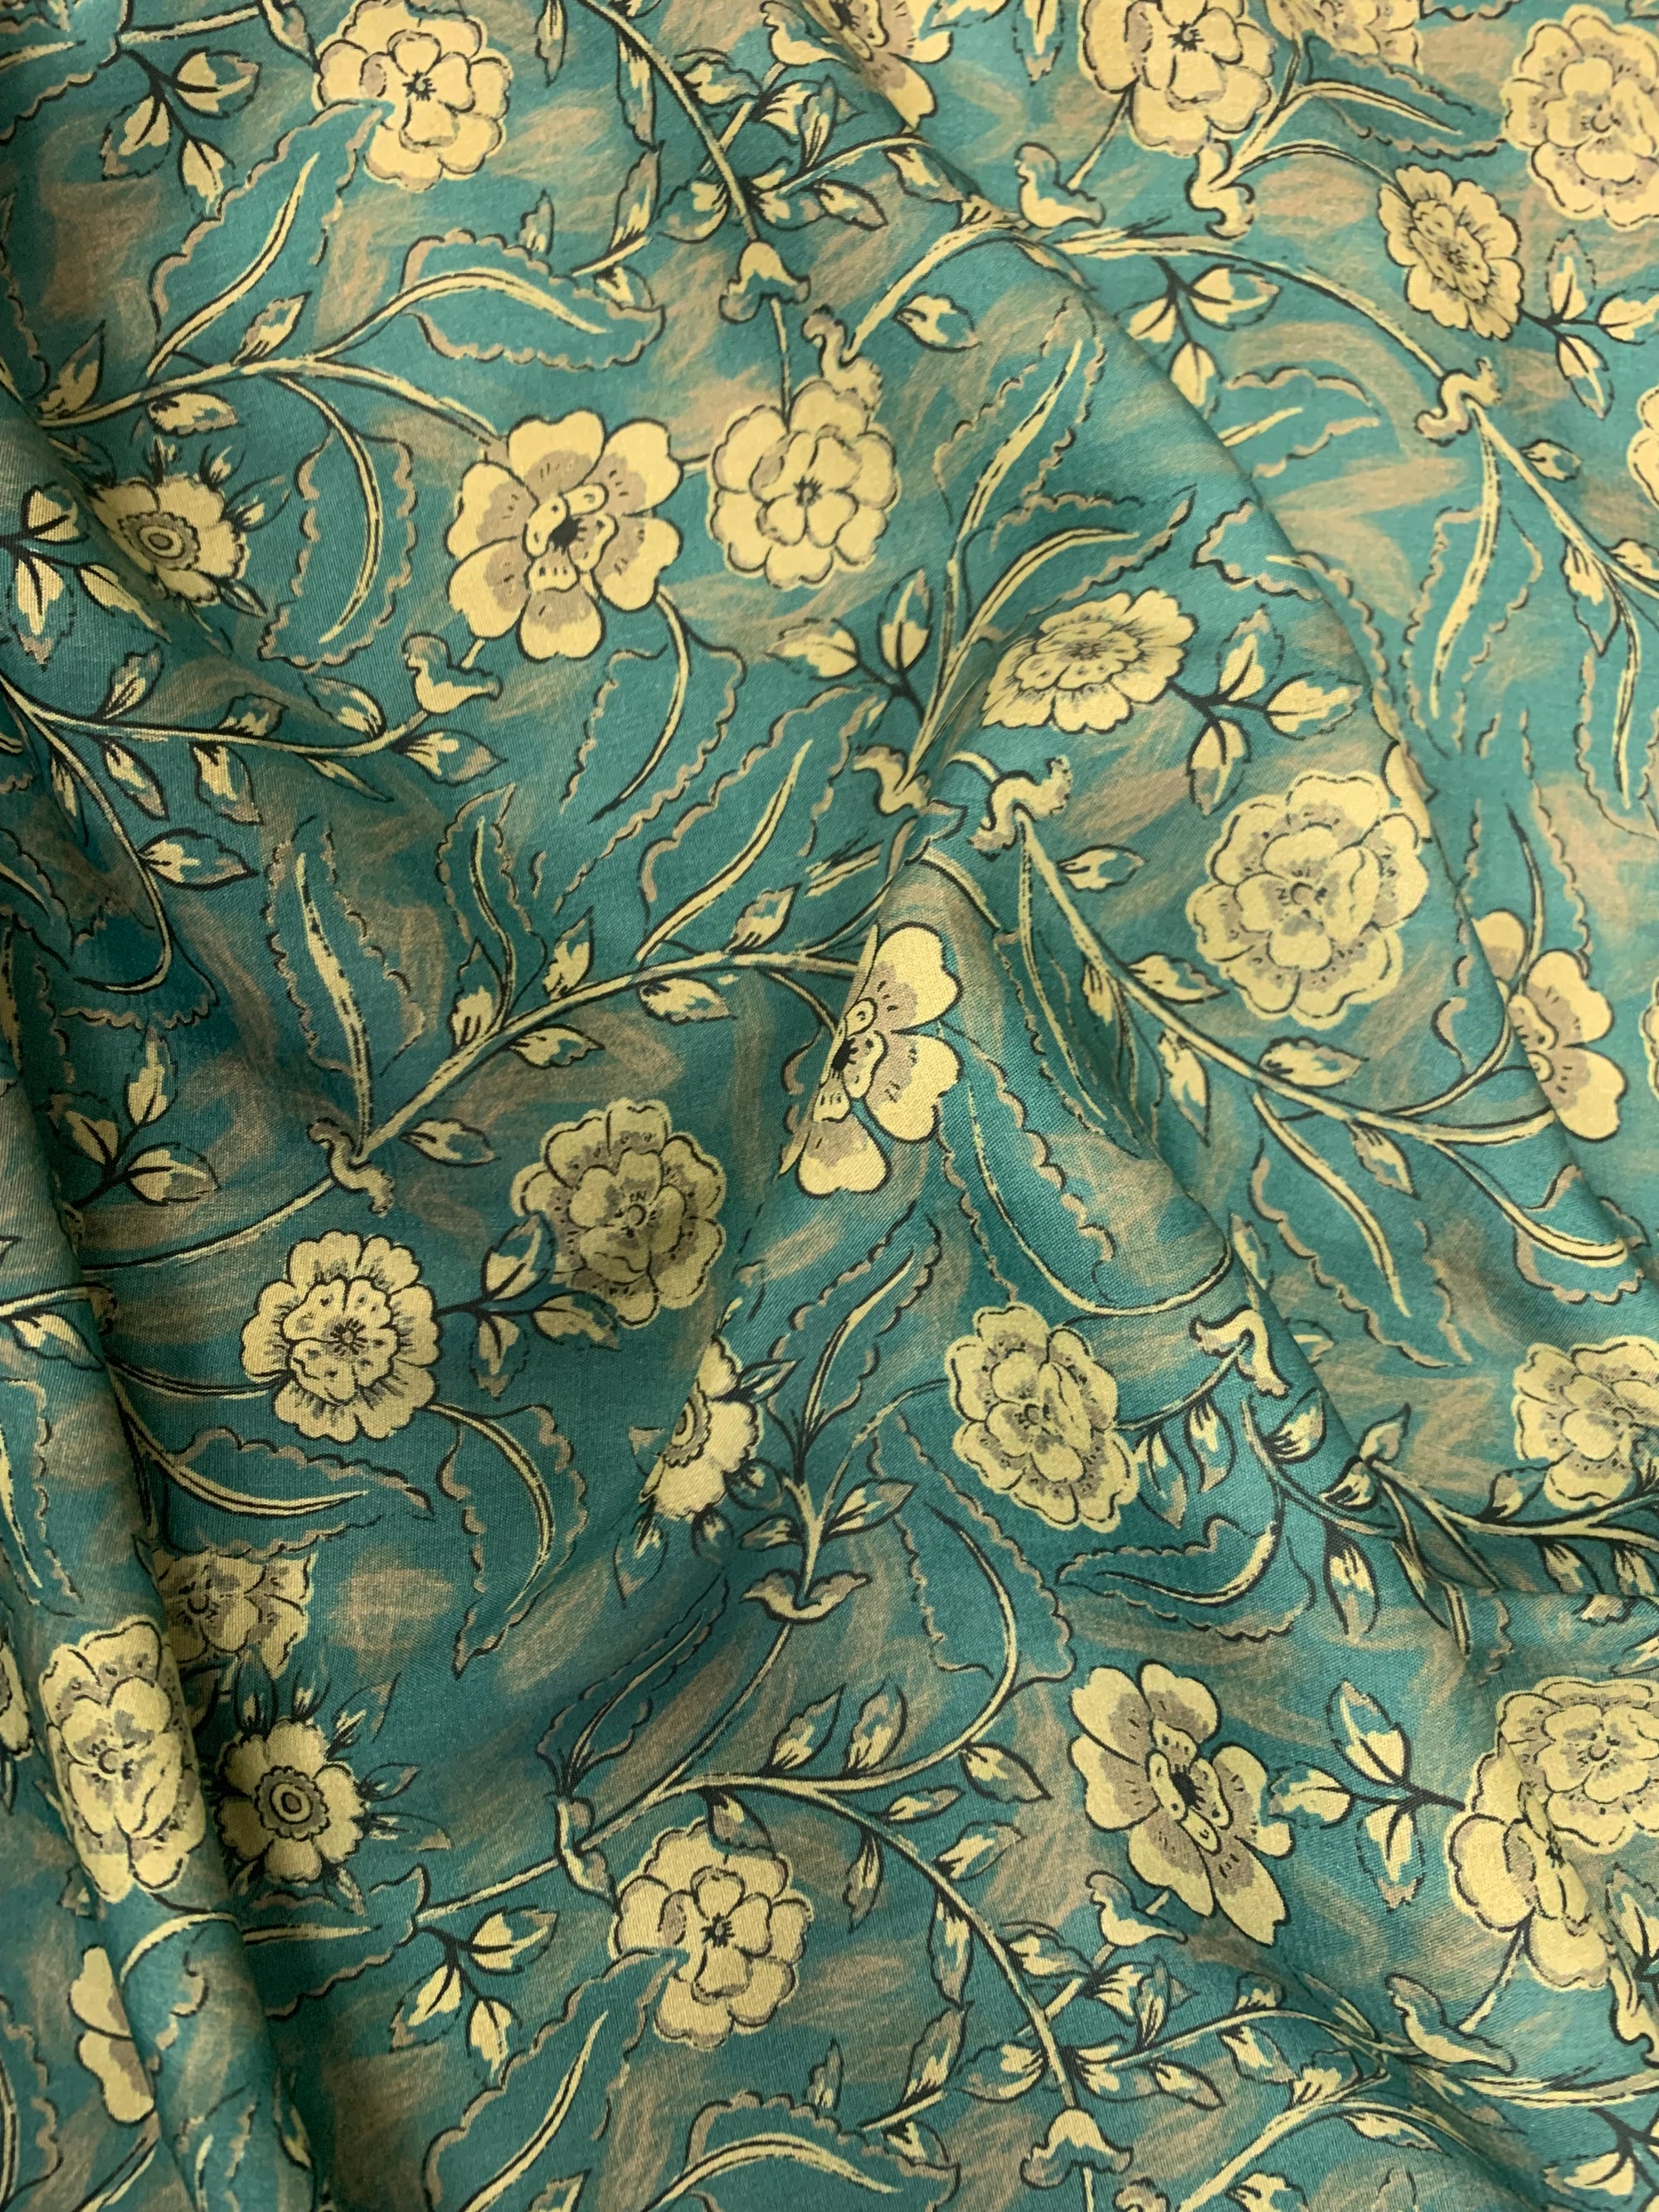 Viscose Challis Fabric is a Teal/Taupe floral print.